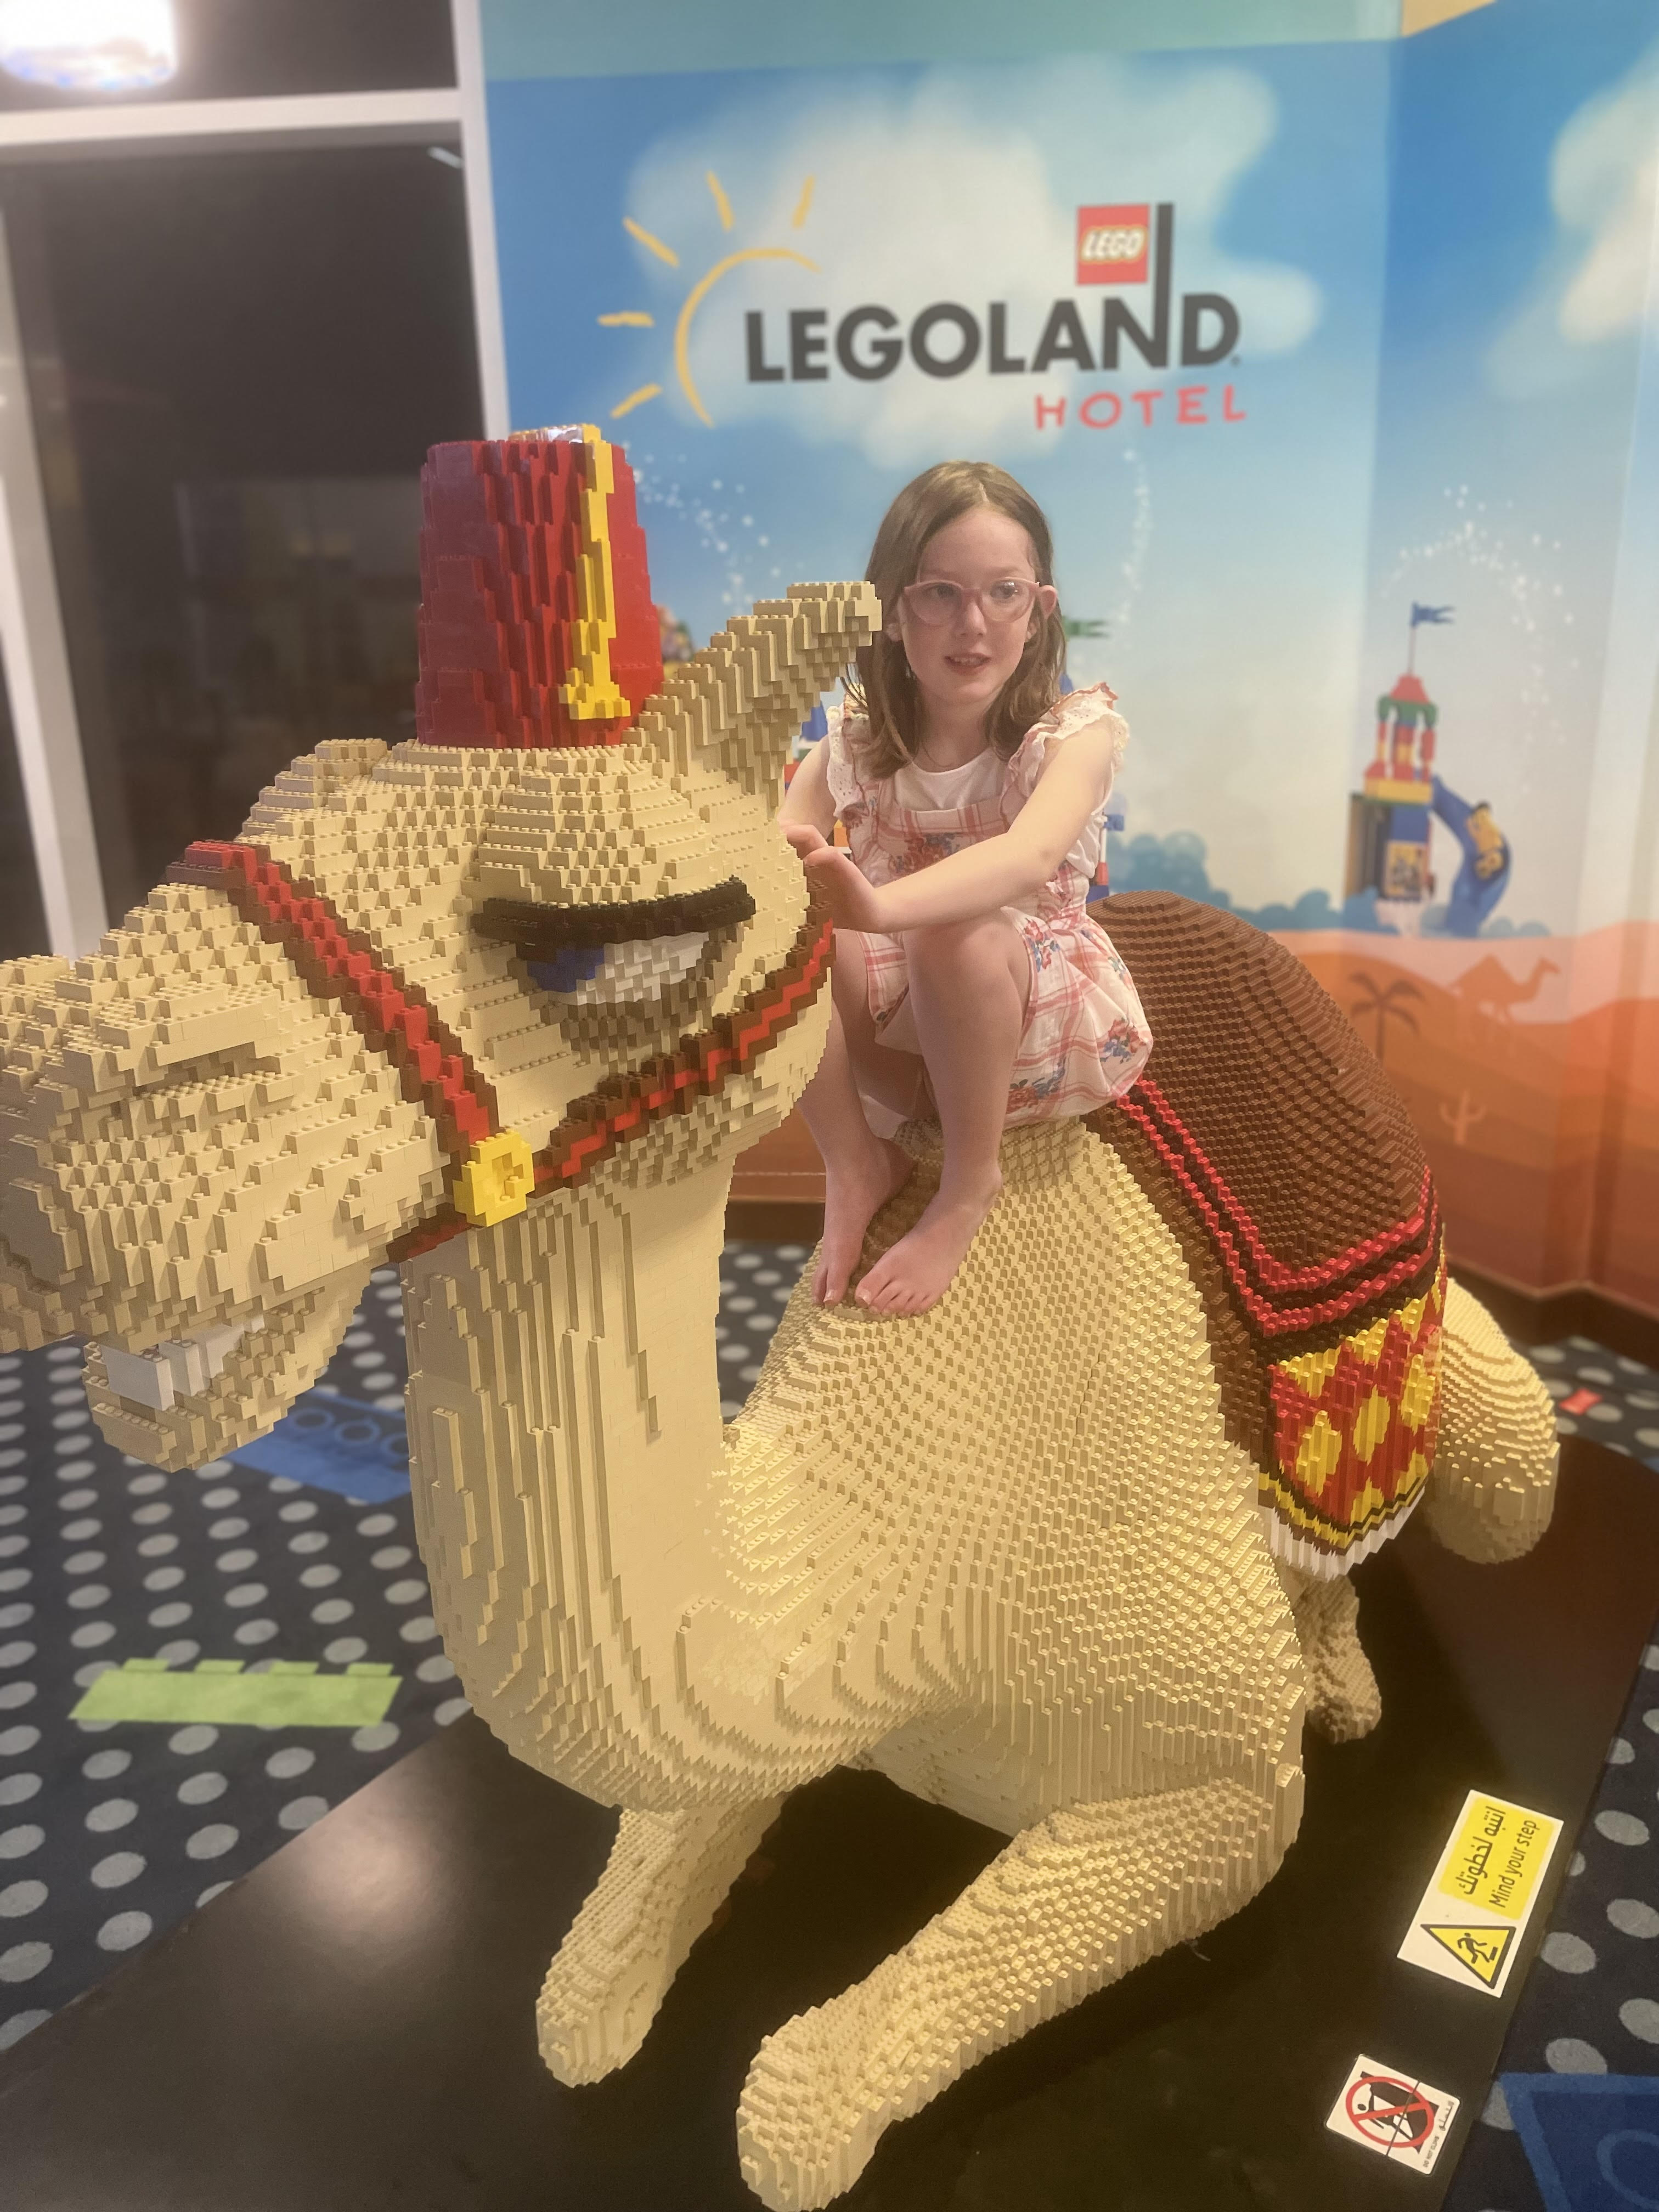 Of course there was a Lego camel